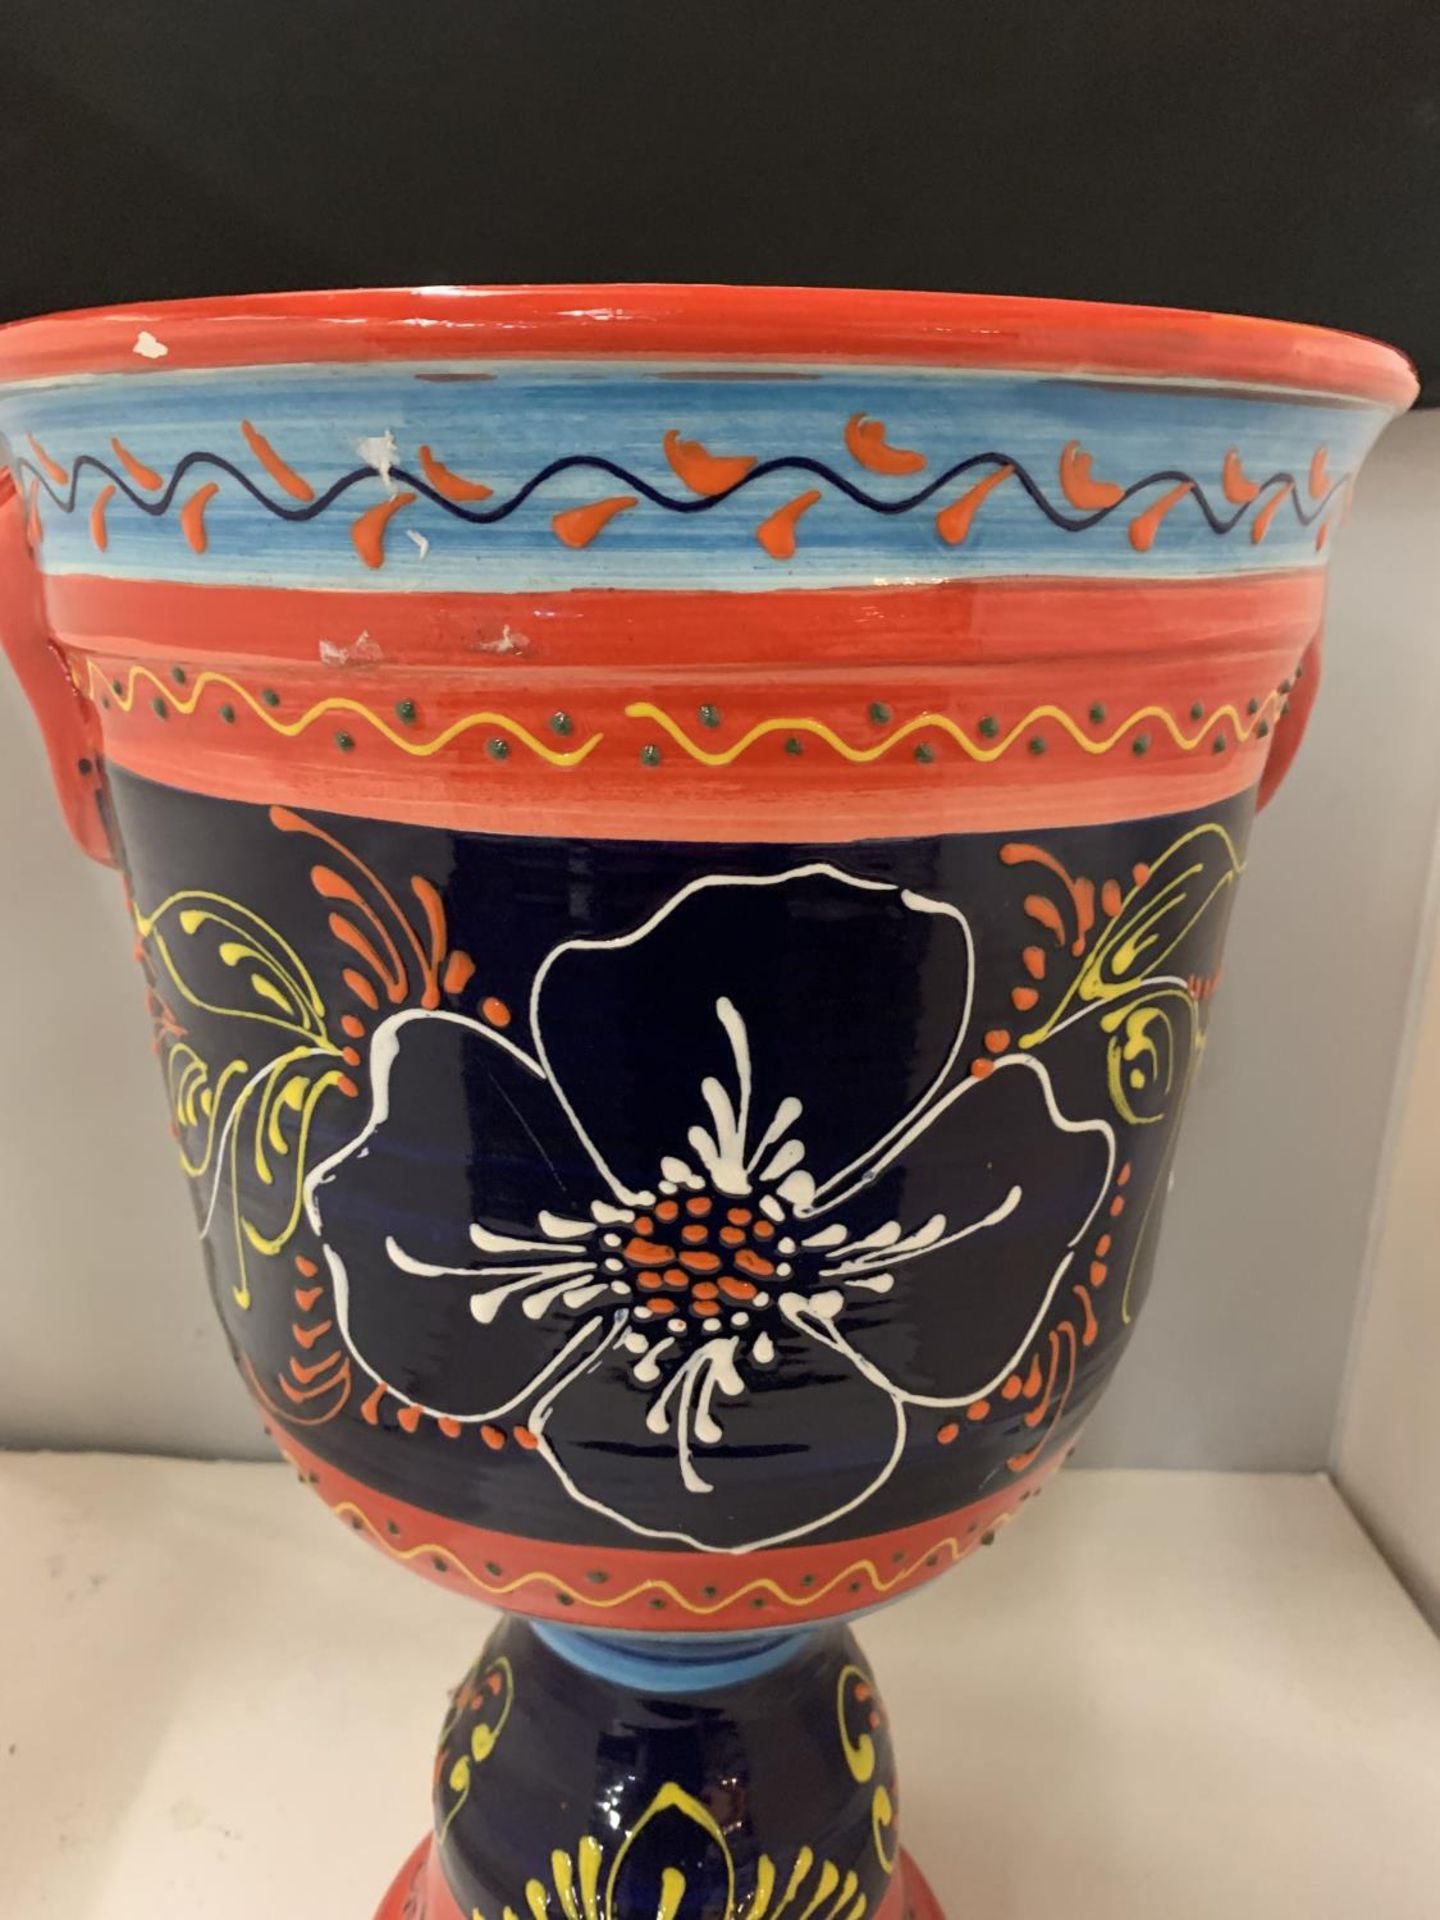 A HIGHLY DECORATED URN/PLANTER, HEIGHT 43CM, DIAMETER 27CM - Image 2 of 4